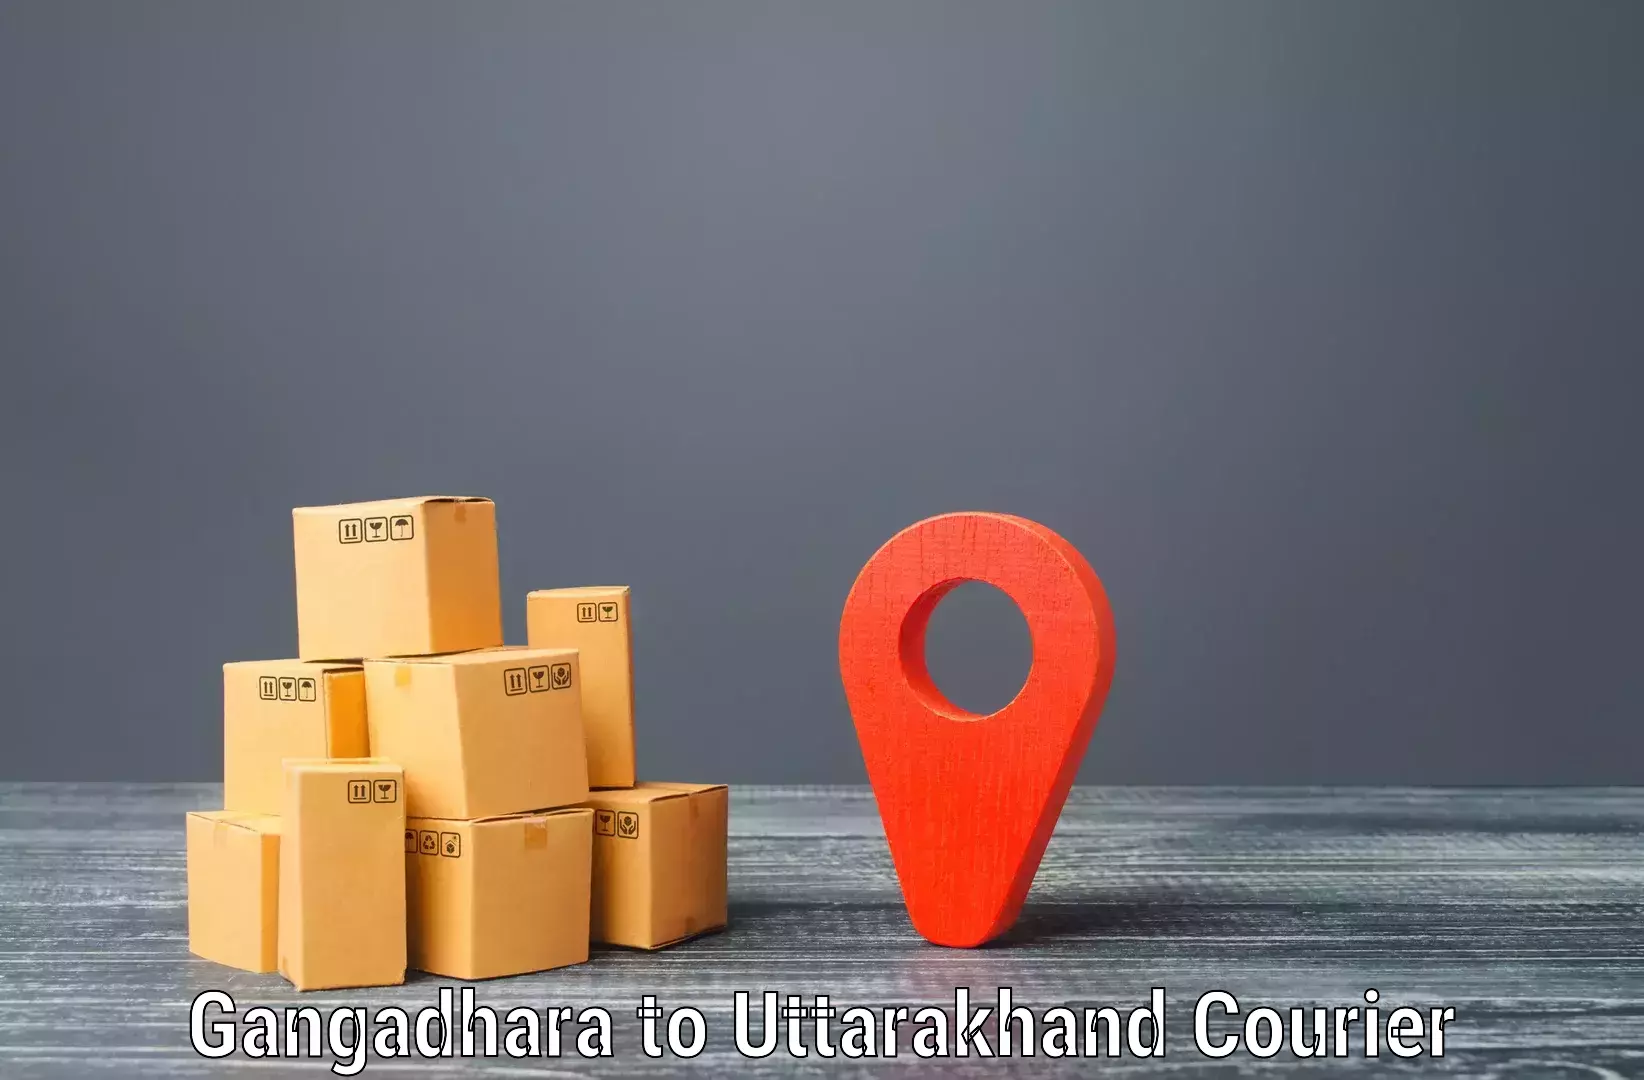 Express delivery capabilities Gangadhara to Pithoragarh